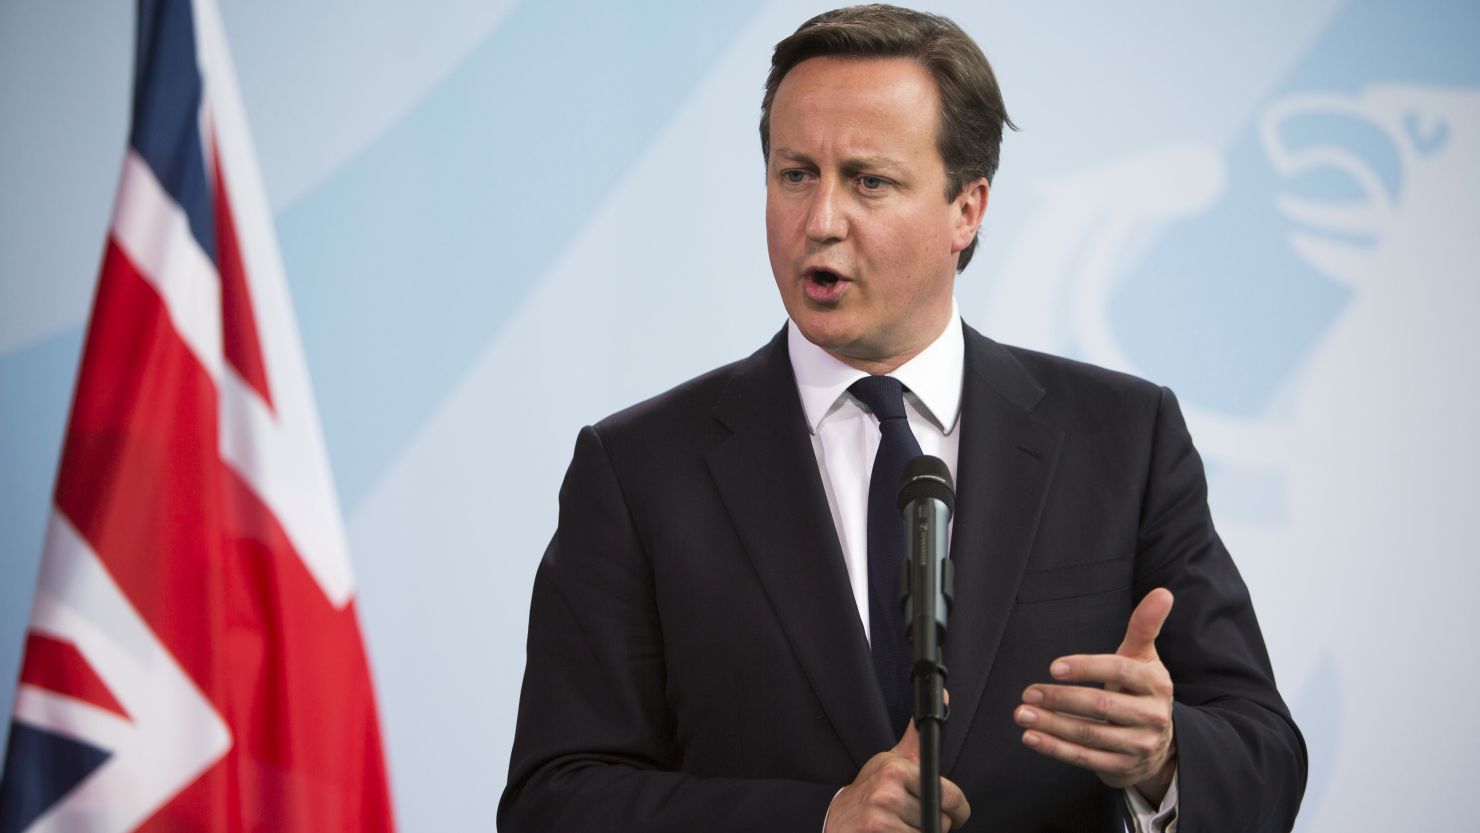 British Prime Minister David Cameron made a surprise visit to the troops in Afghanistan, Thursday.